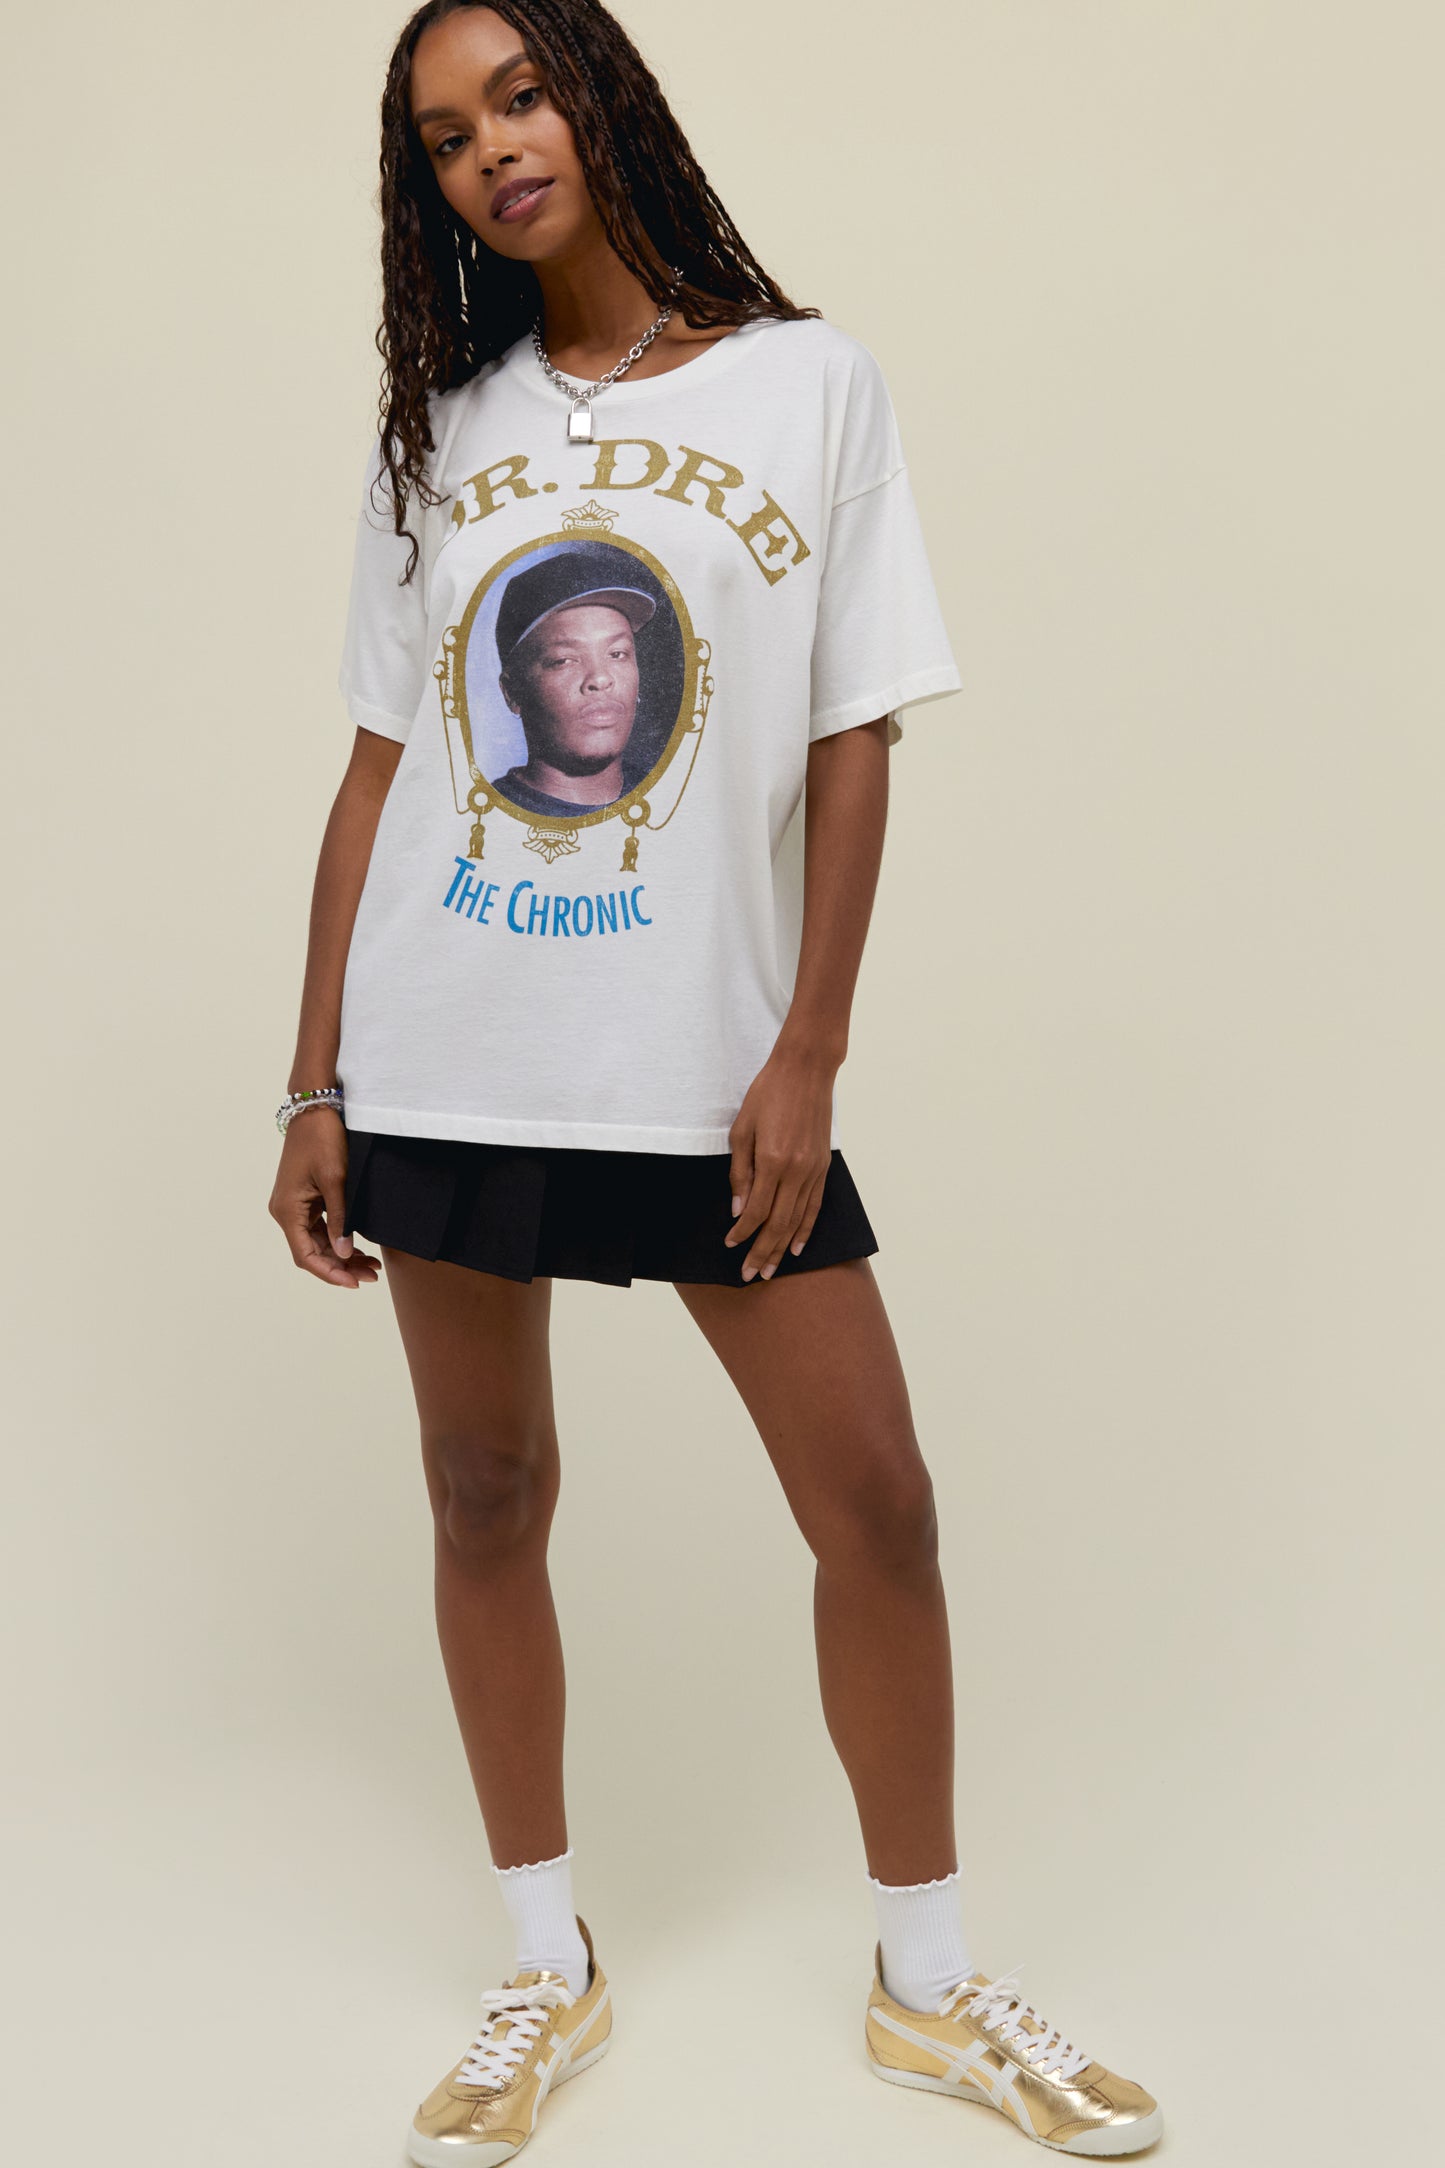 A dark-haired model featuring a white tee designed with the album's cover artwork accented in gold ink and featuring a portrait of the legend.